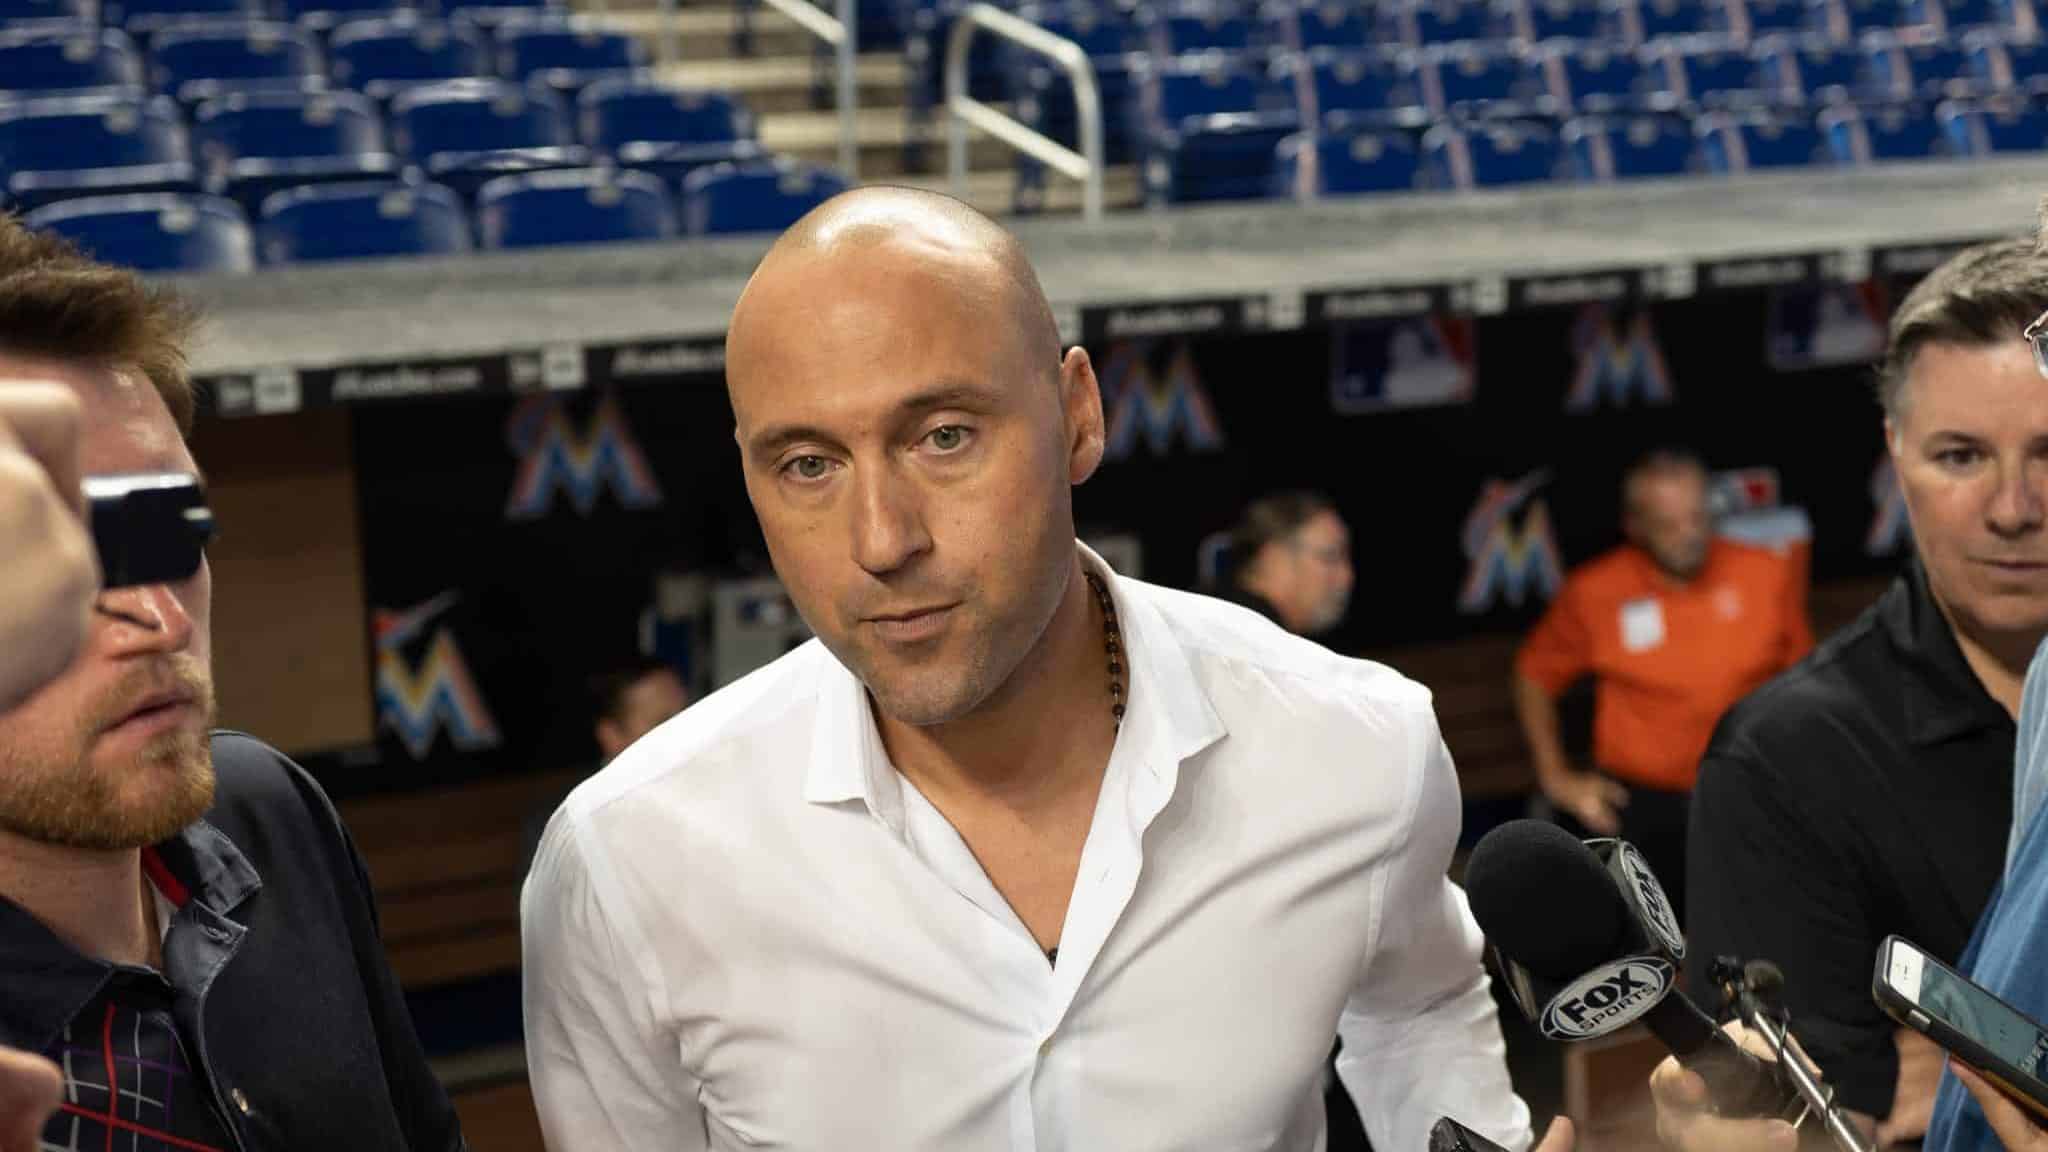 MIAMI, FL - SEPTEMBER 20: Chief Executive Officer Derek Jeter of the Miami Marlins meets with members of the media prior to the game against the Cincinnati Reds at Marlins Park on September 20, 2018 in Miami, Florida.